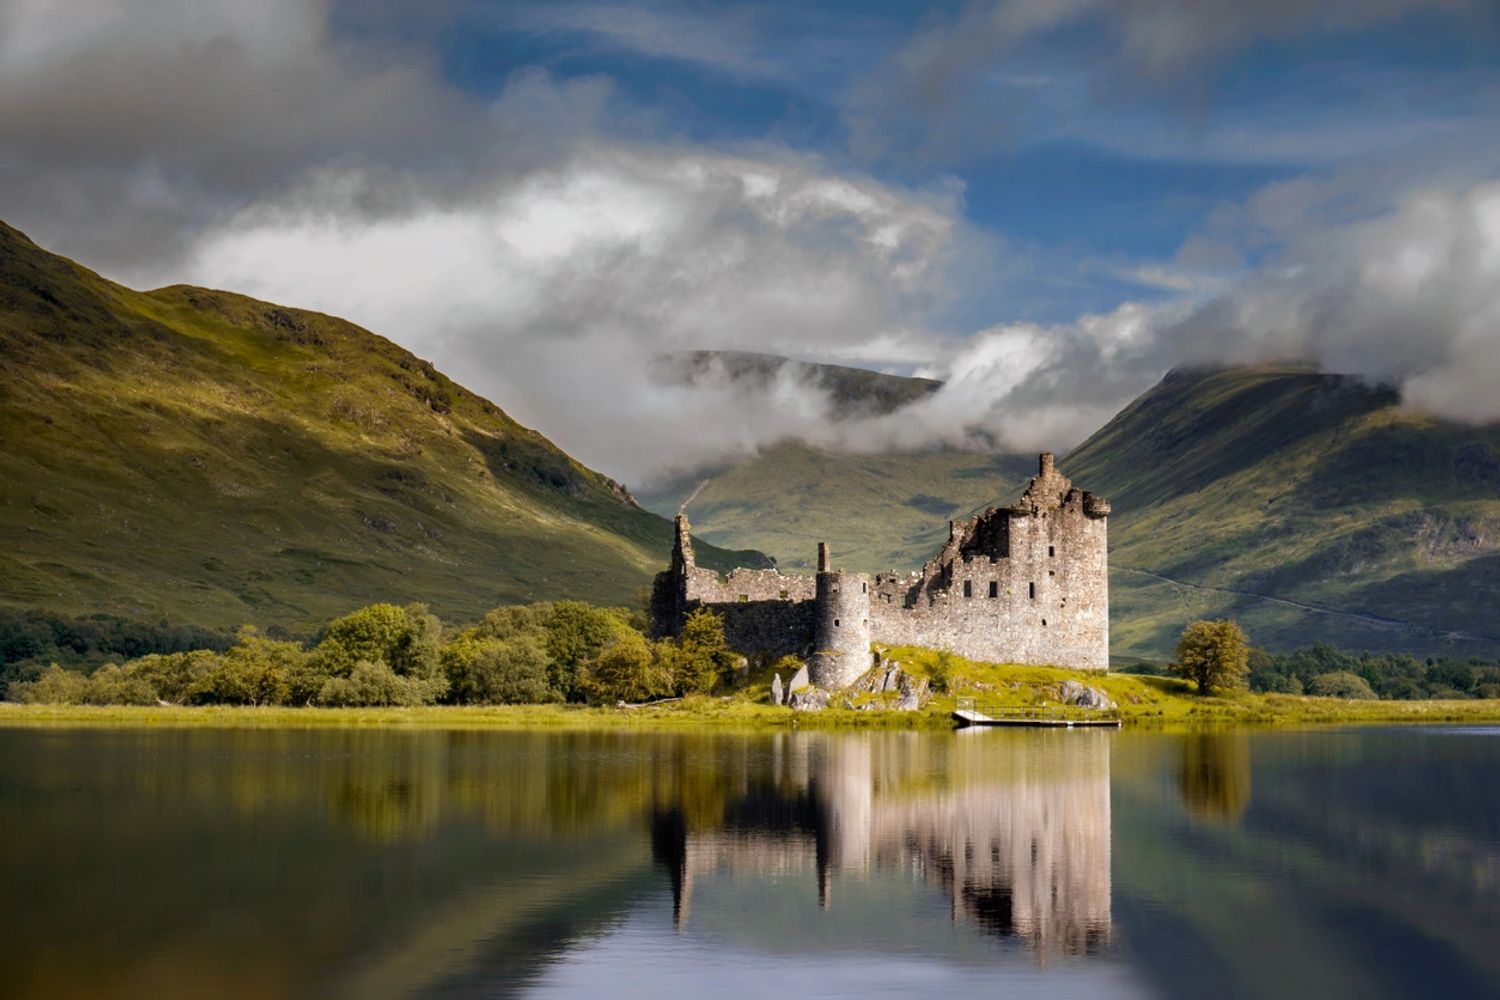 Scottish loch-side castle with backdrop of mountains and whispy white clouds